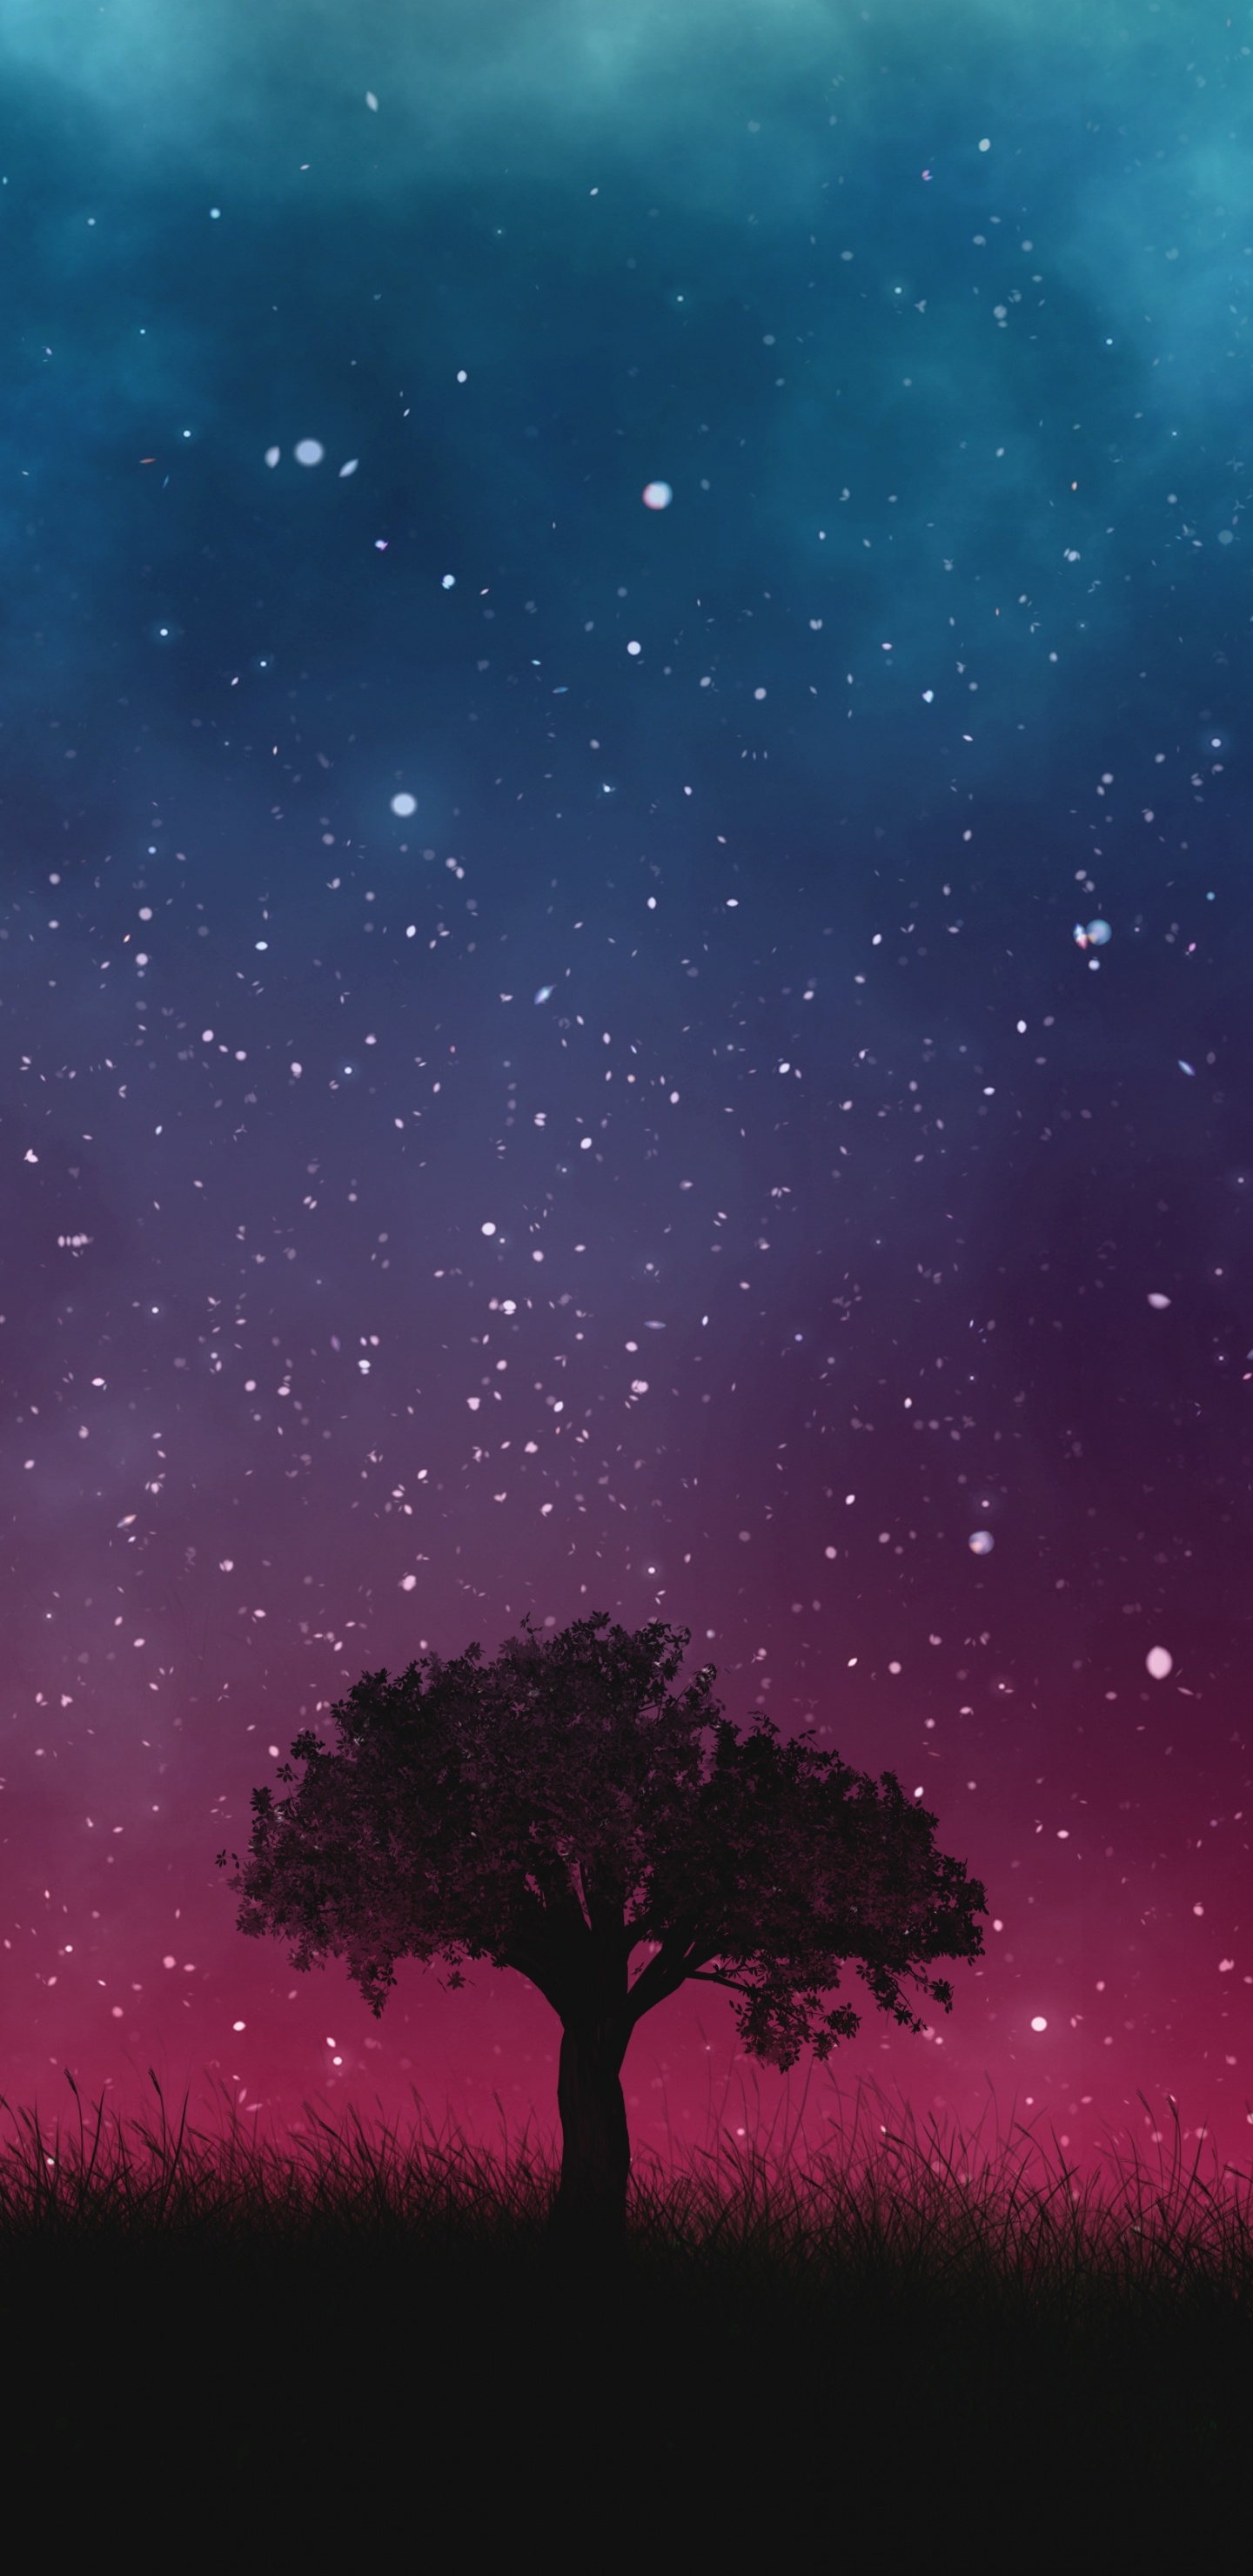 Silhouette of Tree Under Starry Night. Wallpaper in 1440x2960 Resolution